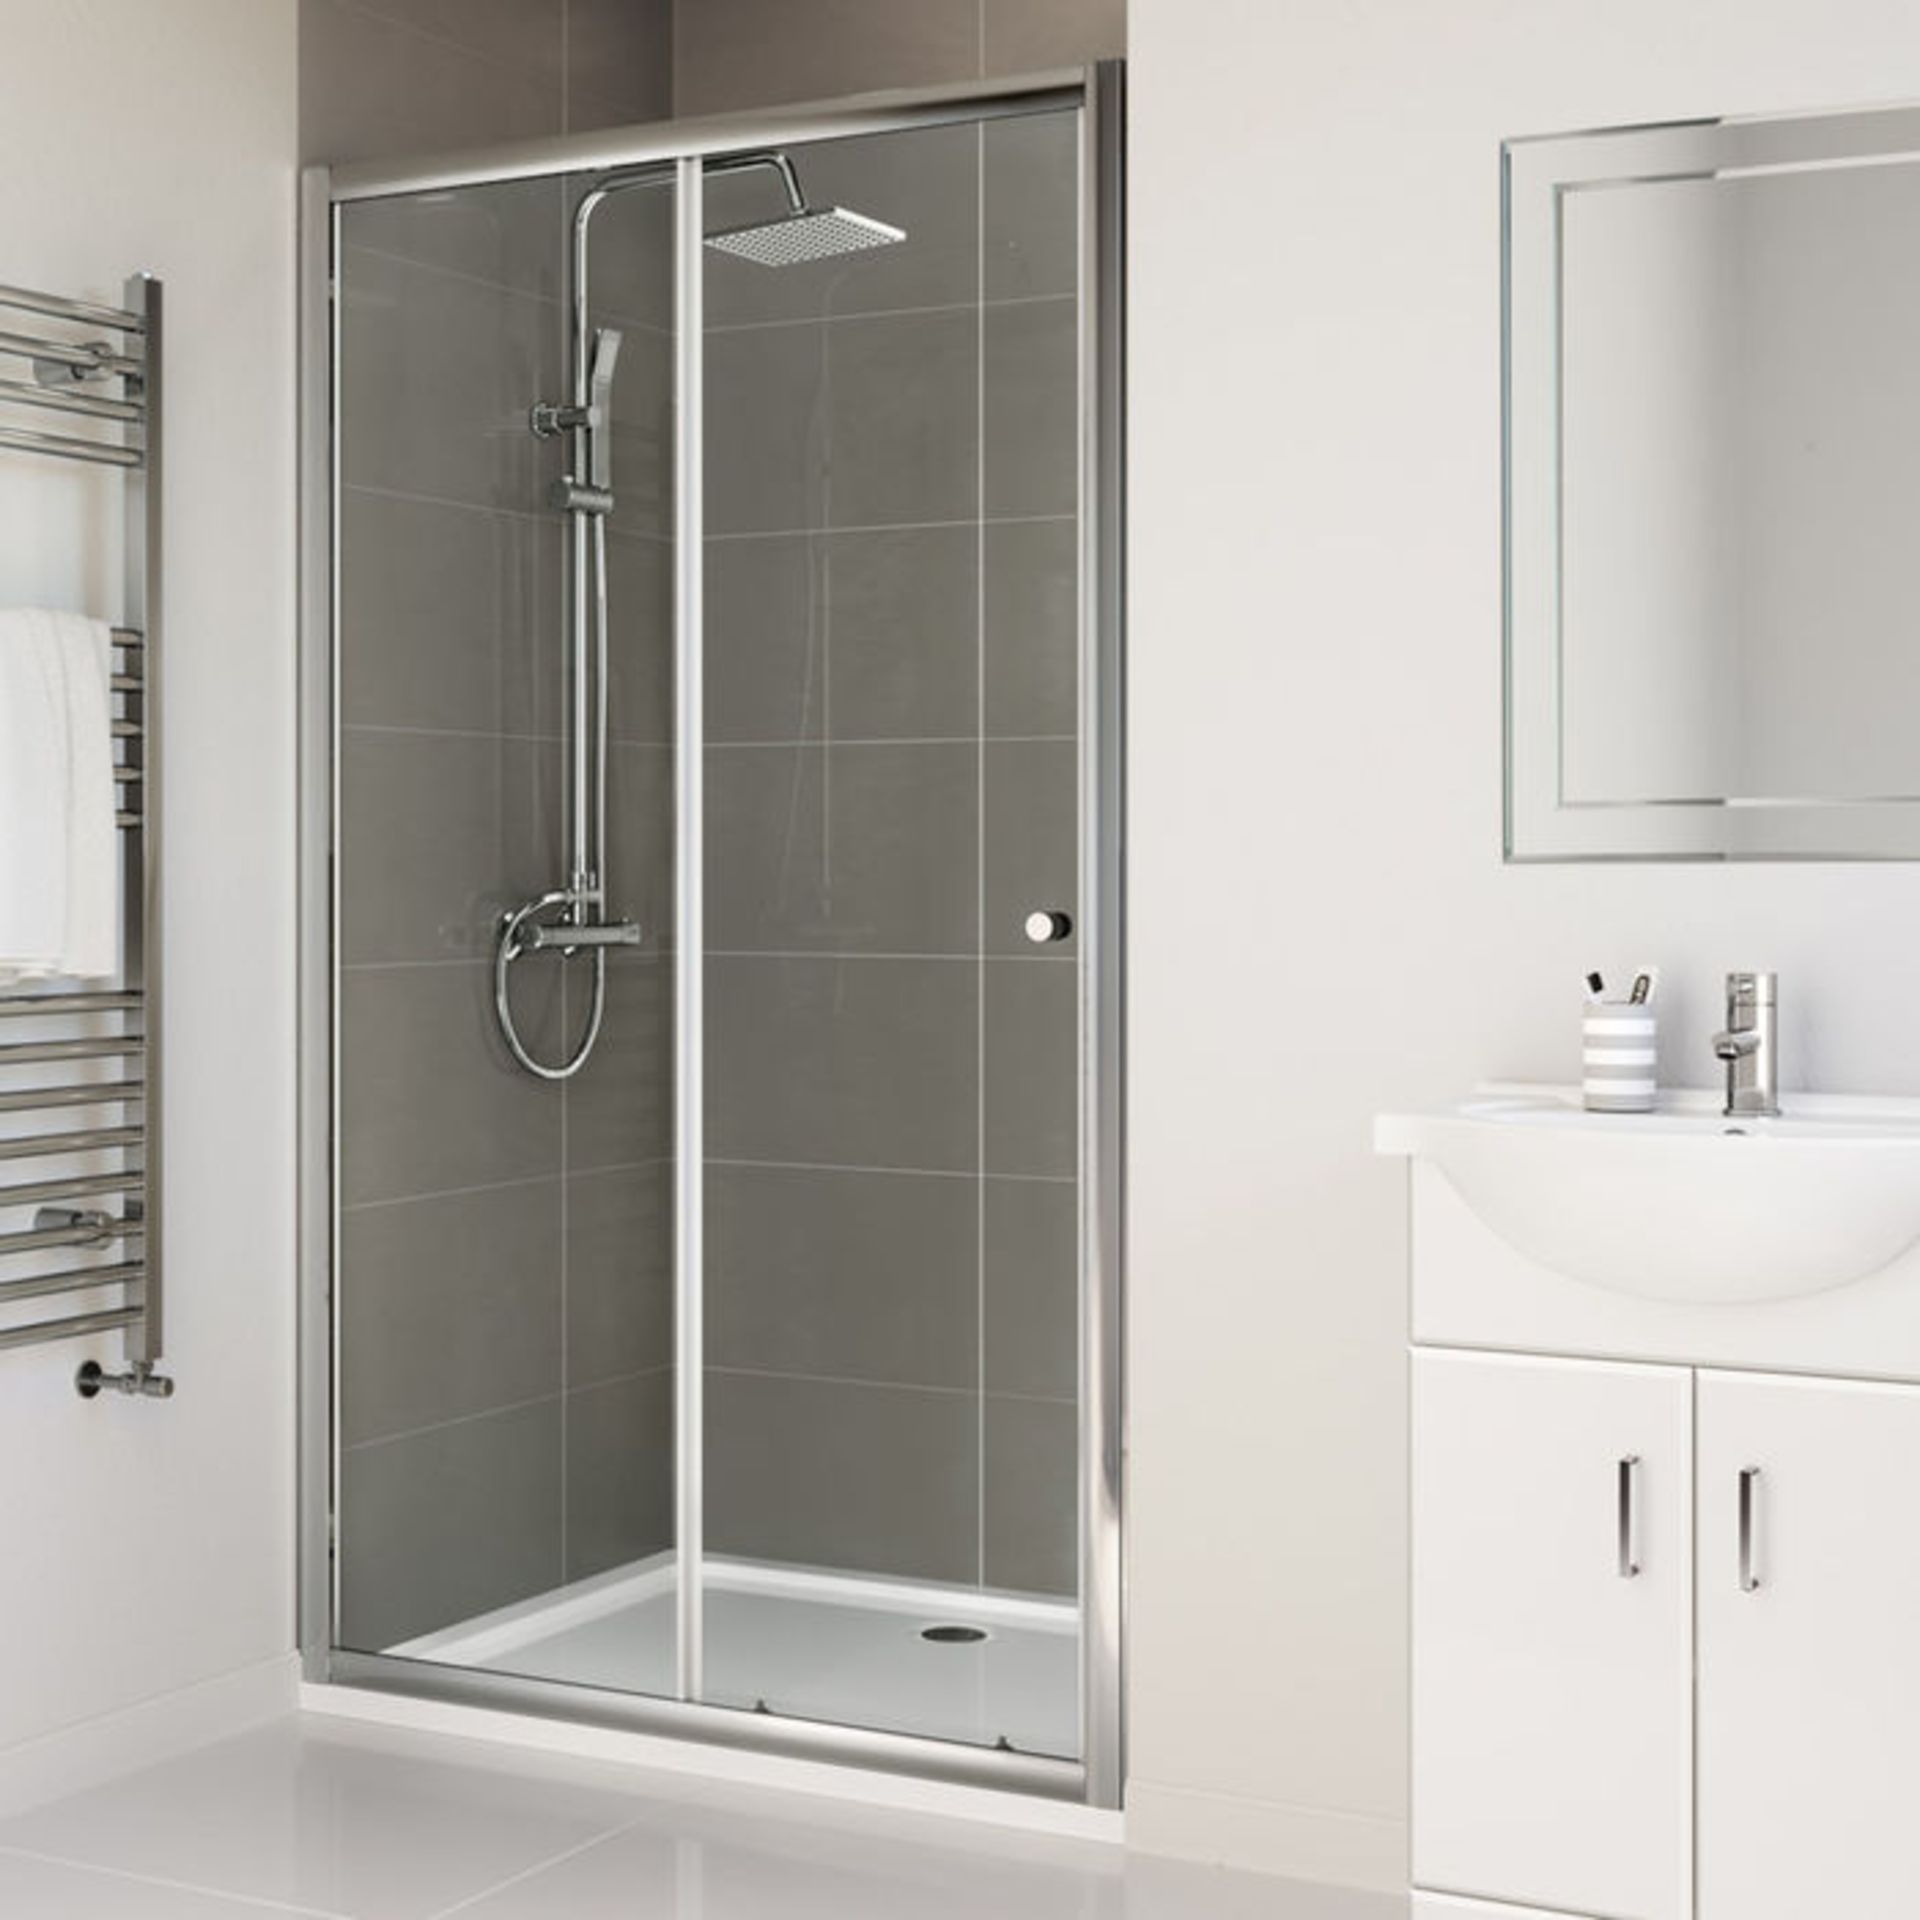 NEW Twyfords 1200mm - Elements Sliding Shower Door. RRP £399.99.4mm Safety Glass Fully waterp...